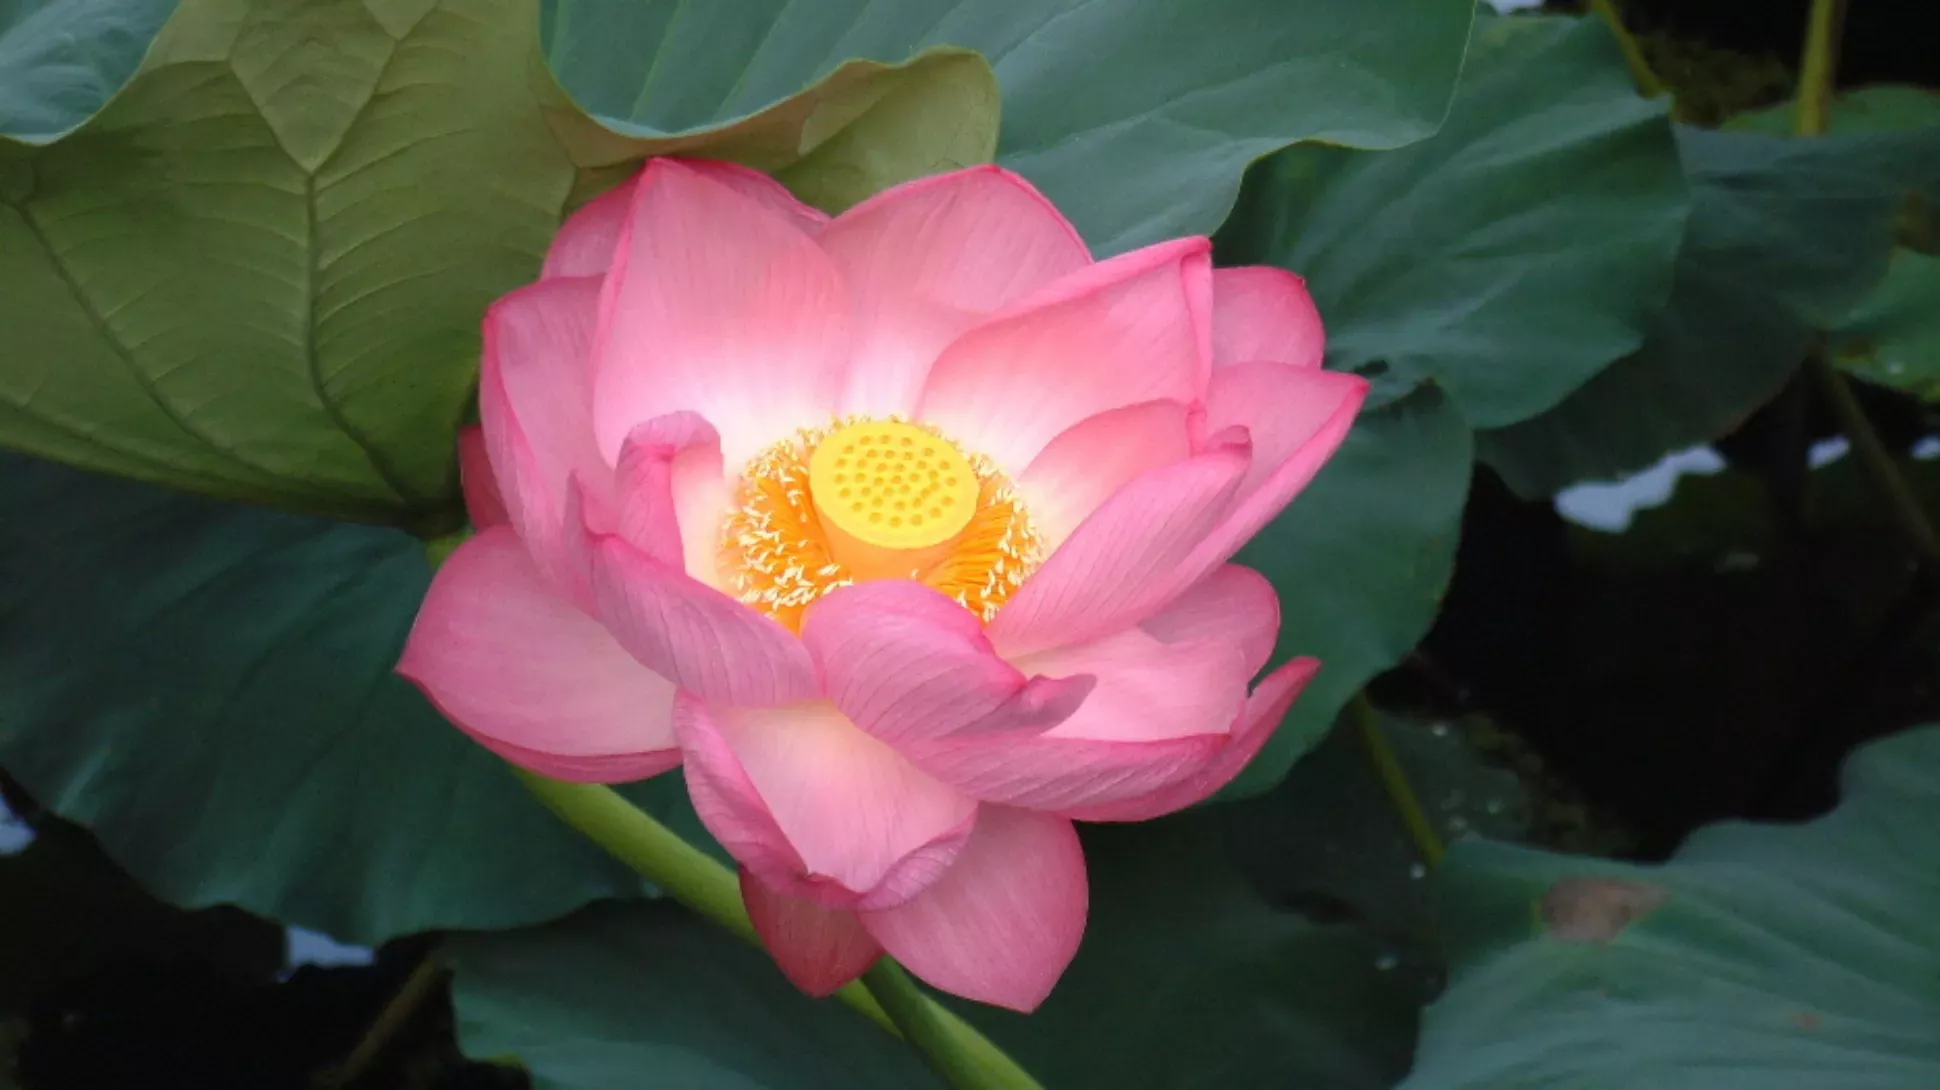 A bright pink scared lotus flower with a yellow centre growing in water